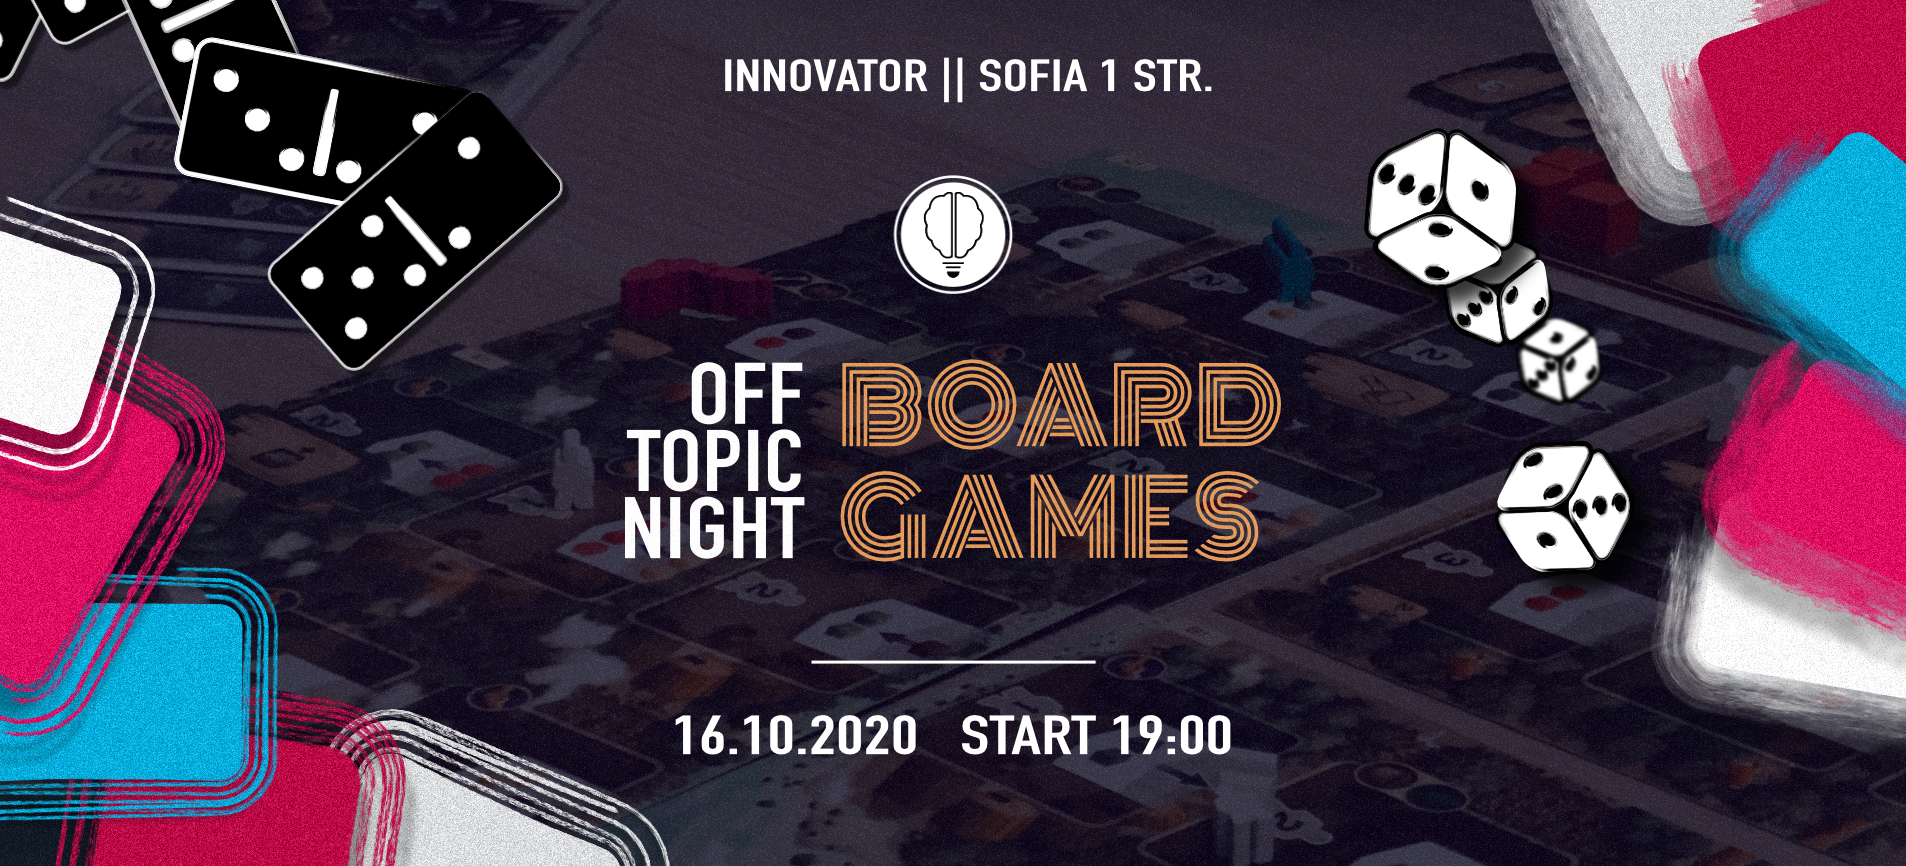 OFF Topic | Board Games Night 18 | Innovator Coworking Space